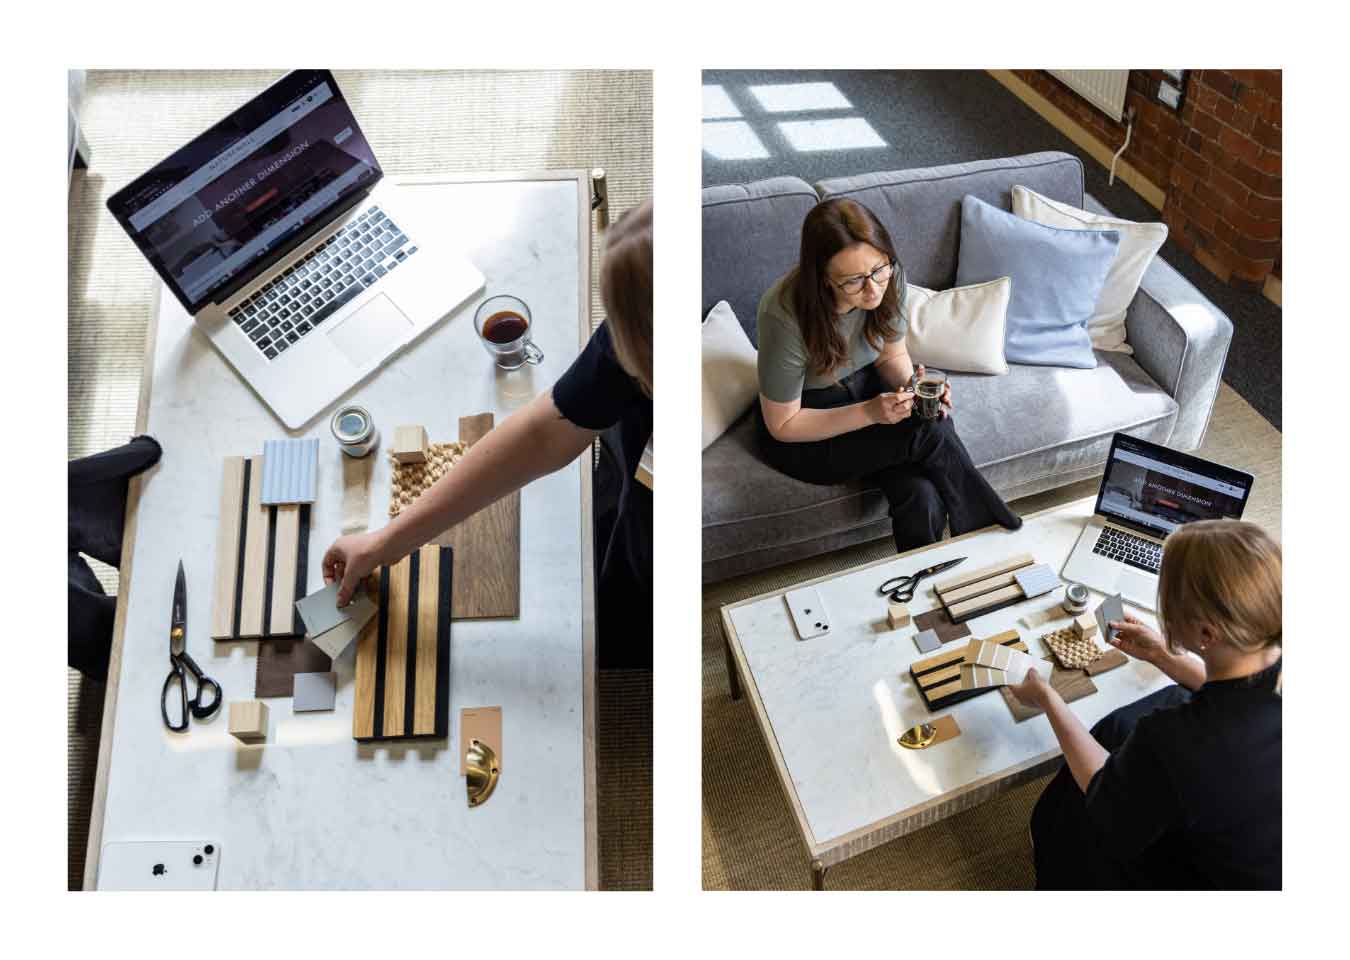 Left: A coffee table with an open laptop and wood panelling mood board. Right: two women sitting at the coffee table.